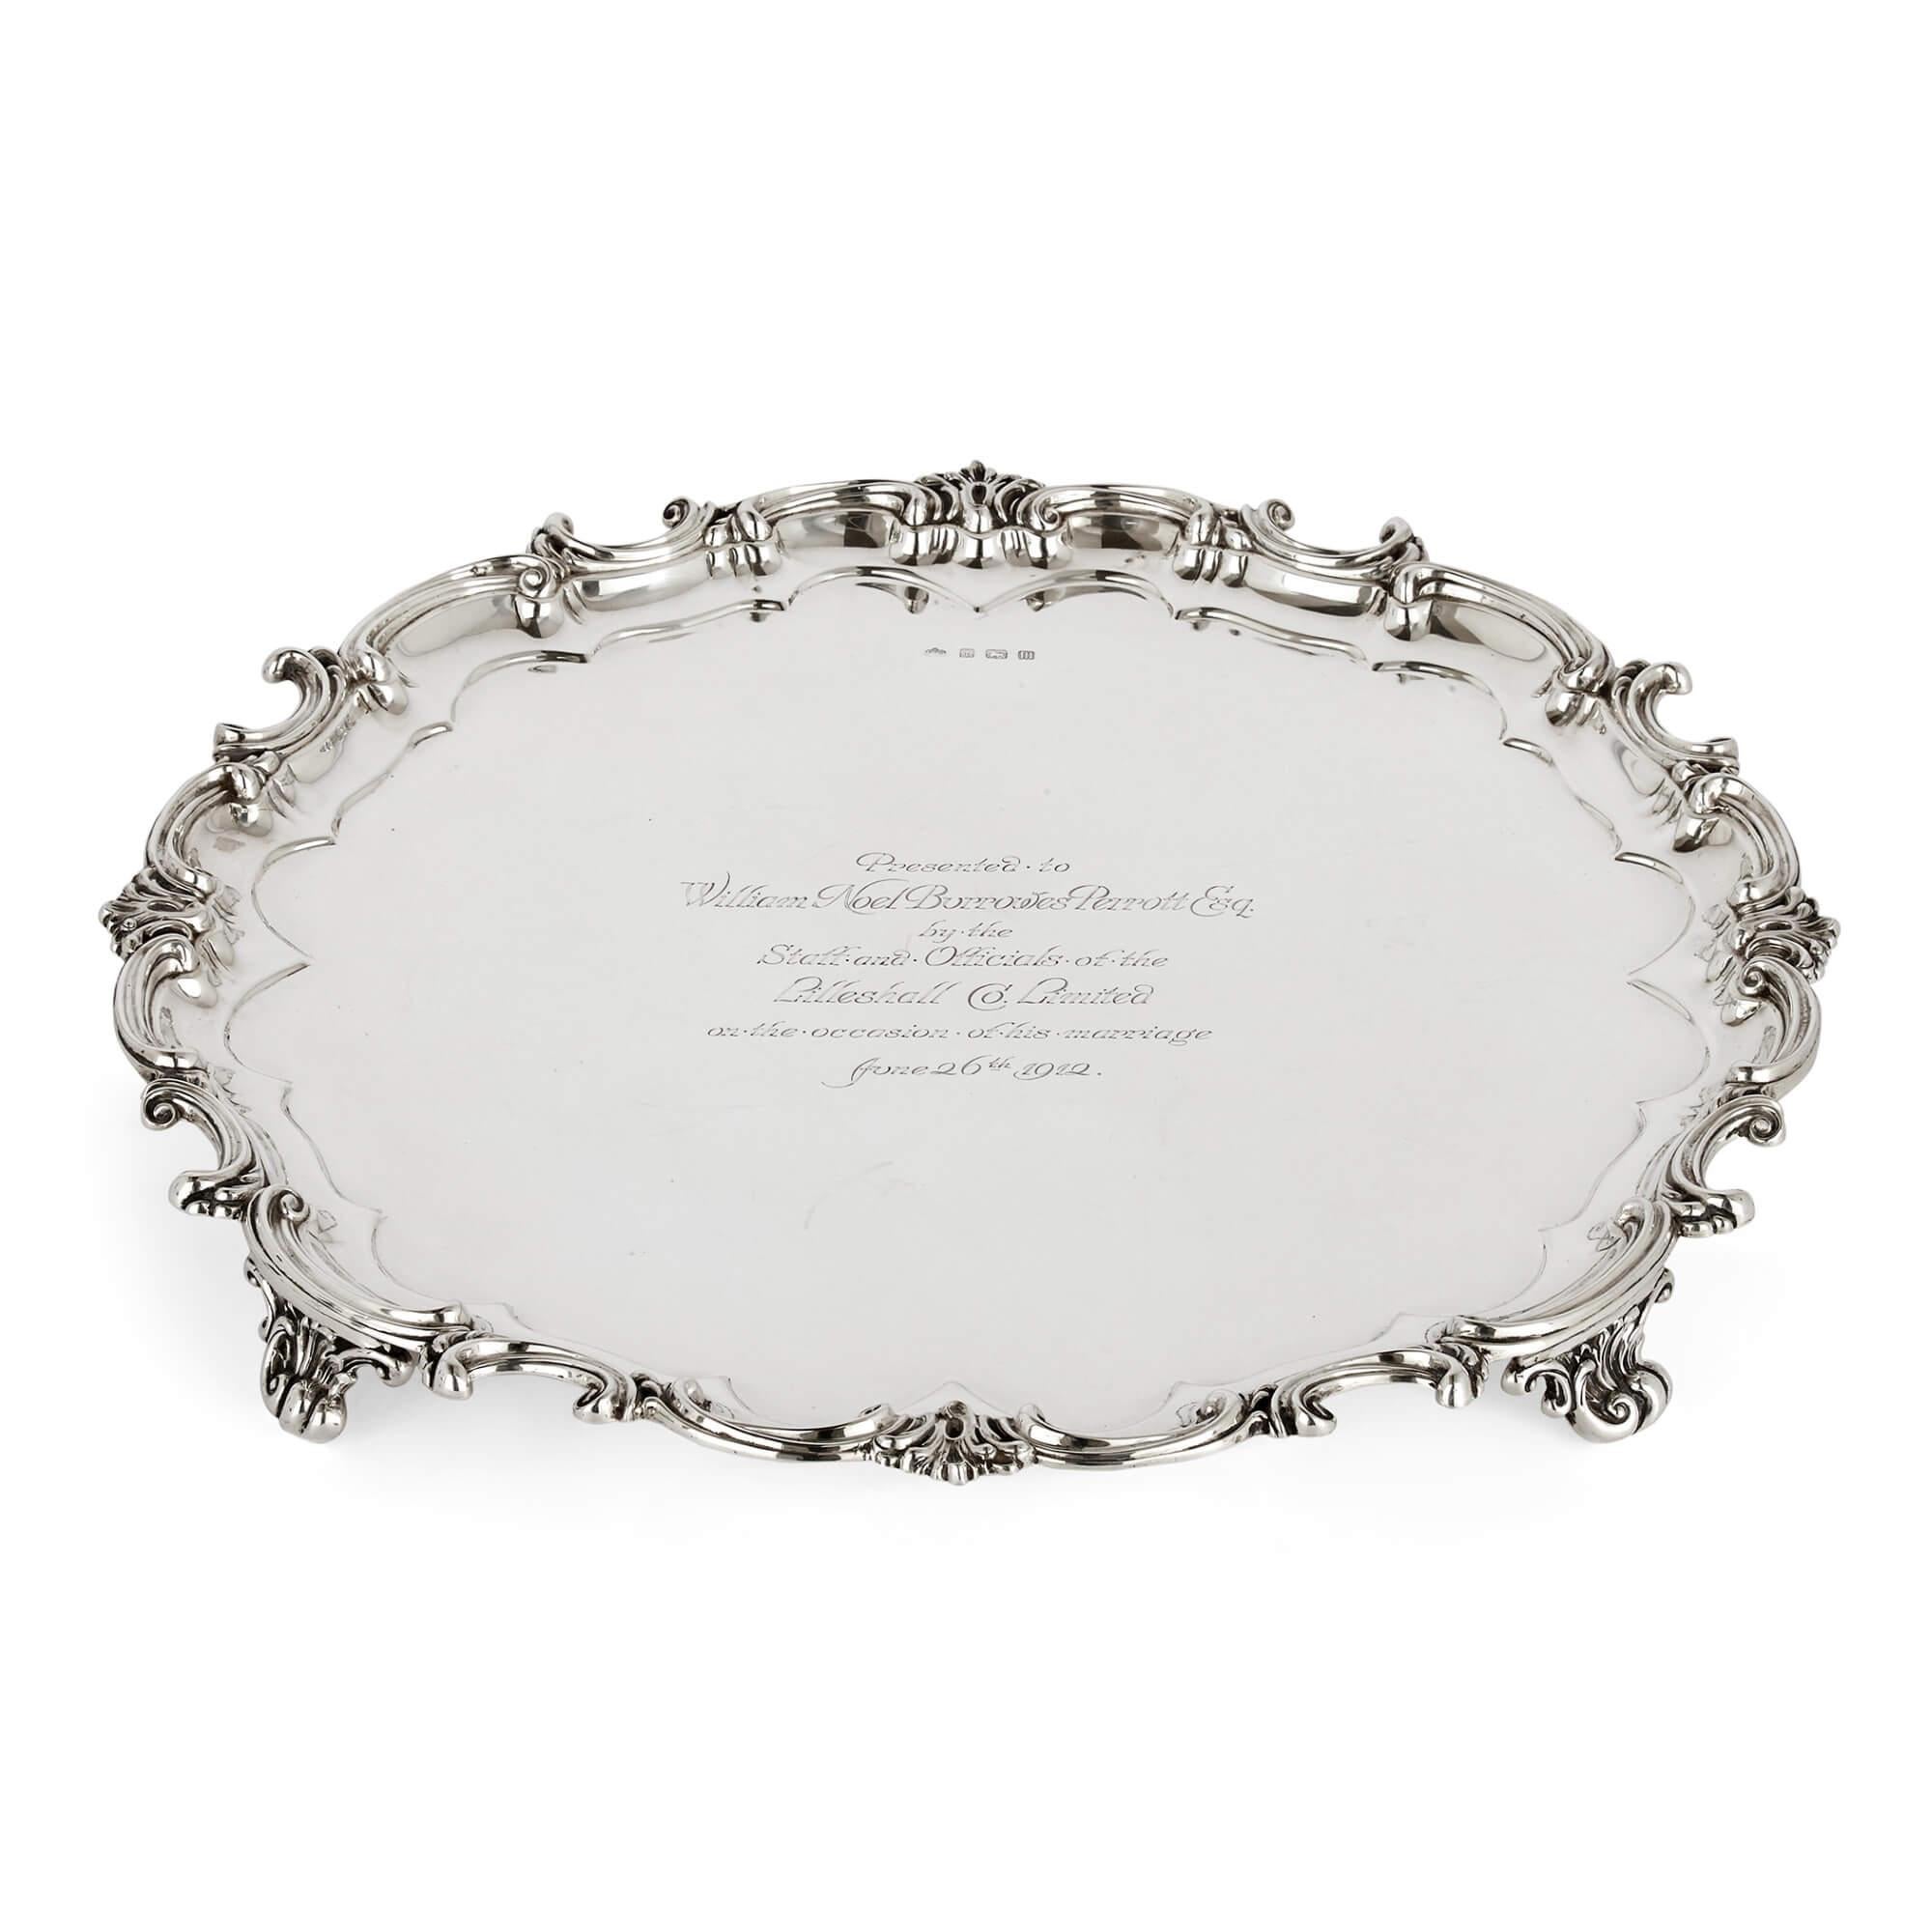 English Sterling silver tray with case by Elkington
English, 1911
Tray: Height 5cm, diameter 51cm
Case: Height 8.5cm, width 55cm, depth 55cm

This charming solid silver tray is by the famous firm Elkington. The tray is circular in shape, with a